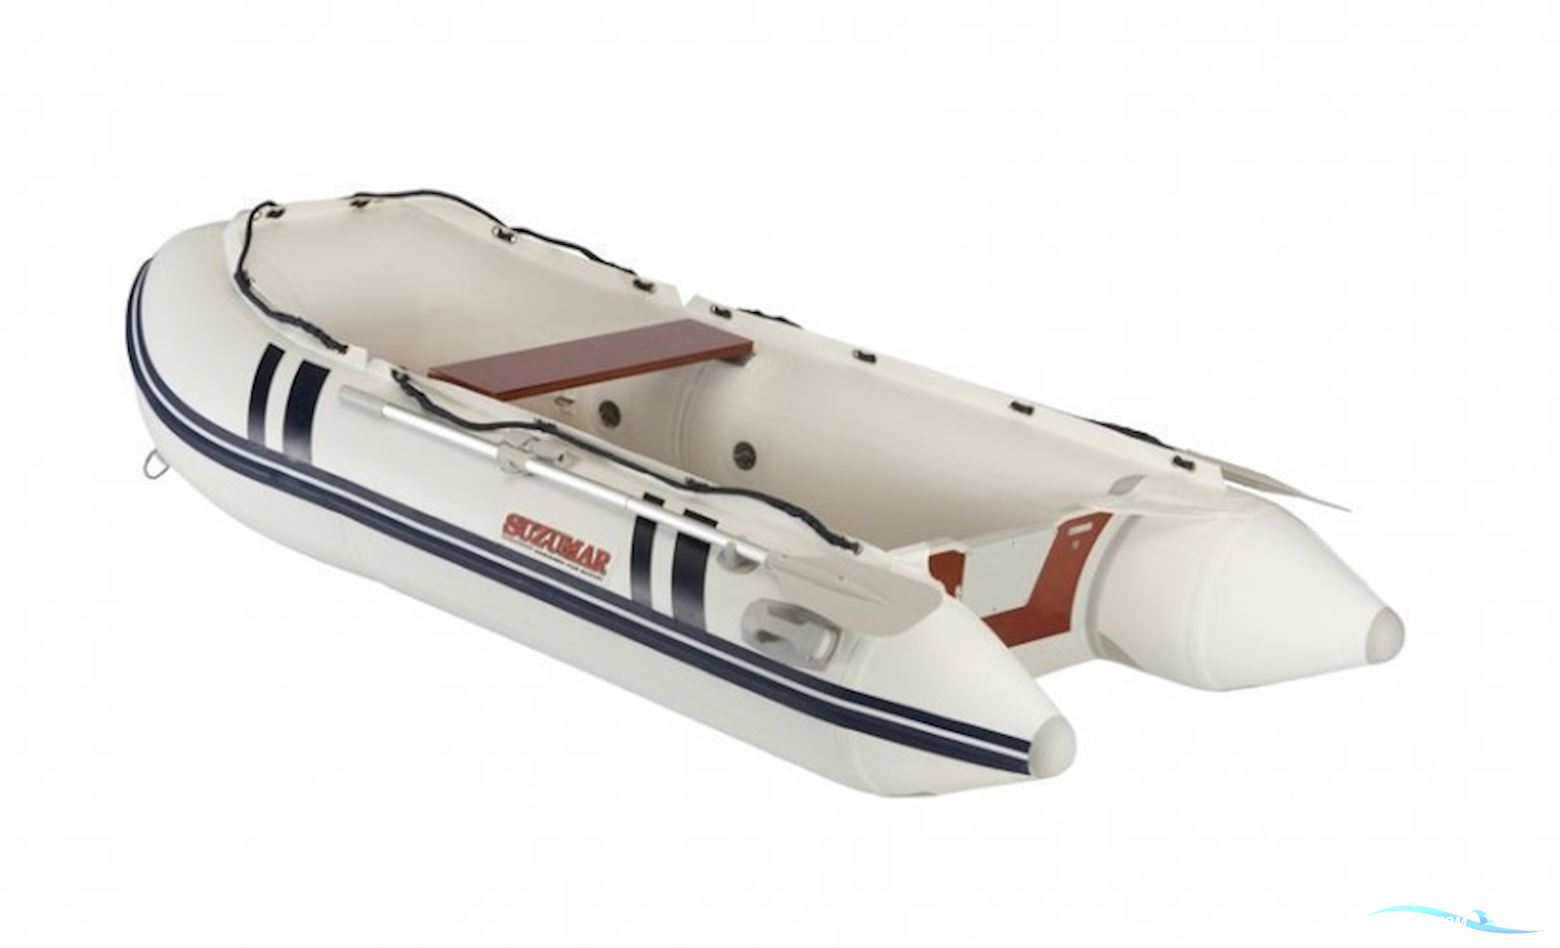 Suzumar DS 390 Alu Inflatable / Rib 2023, The Netherlands